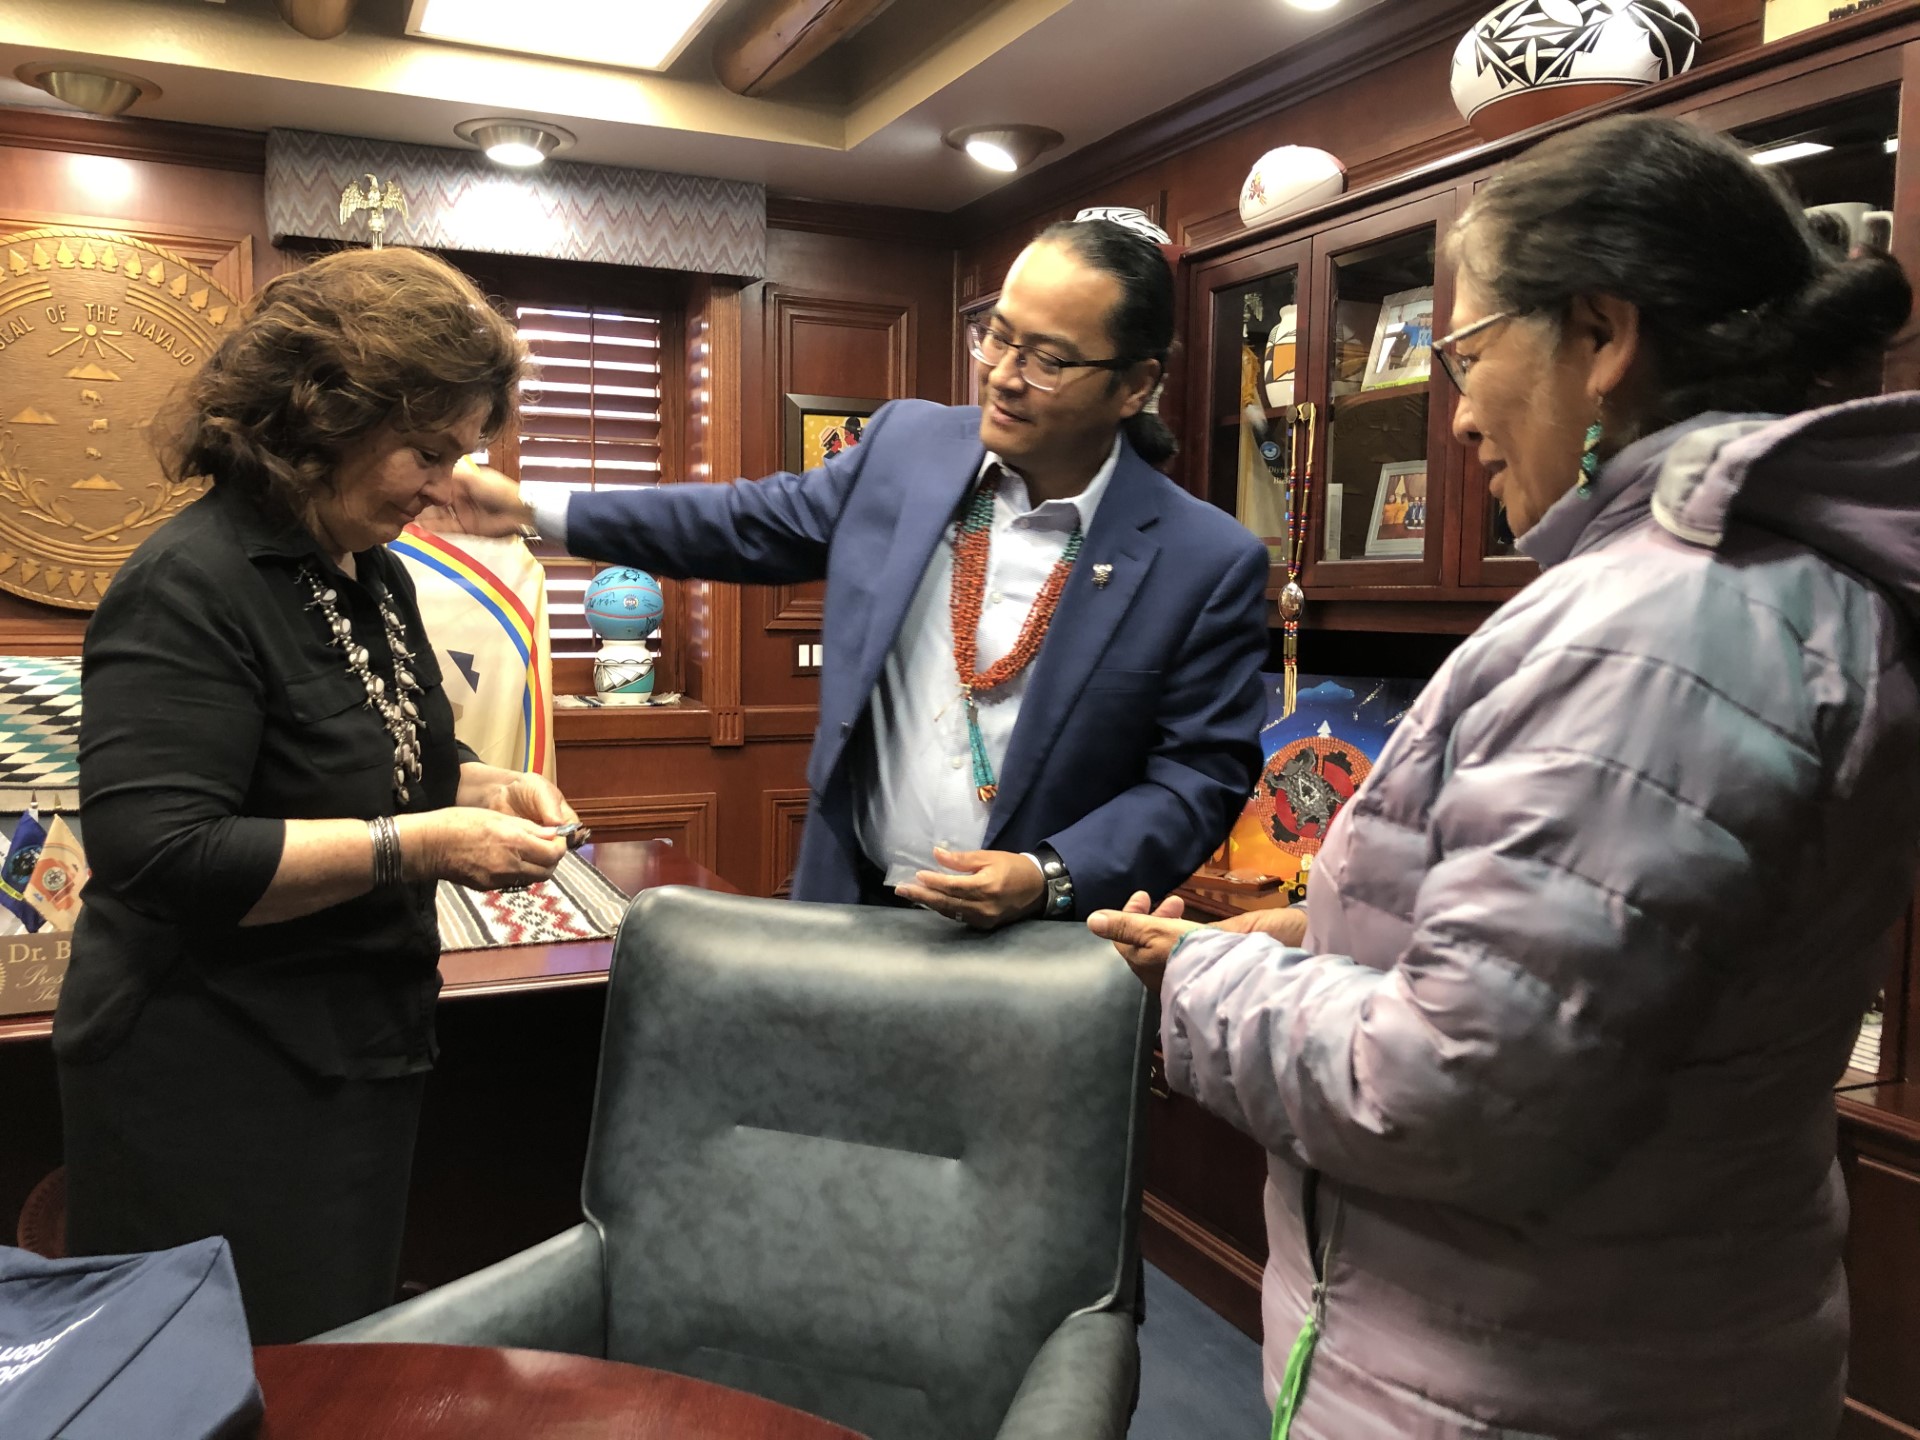 She re-connected with Navajo Nation President Bu Nygren who presented her with a specially minted presidential coin that is bestowed on dignitaries and friends of the Nation.